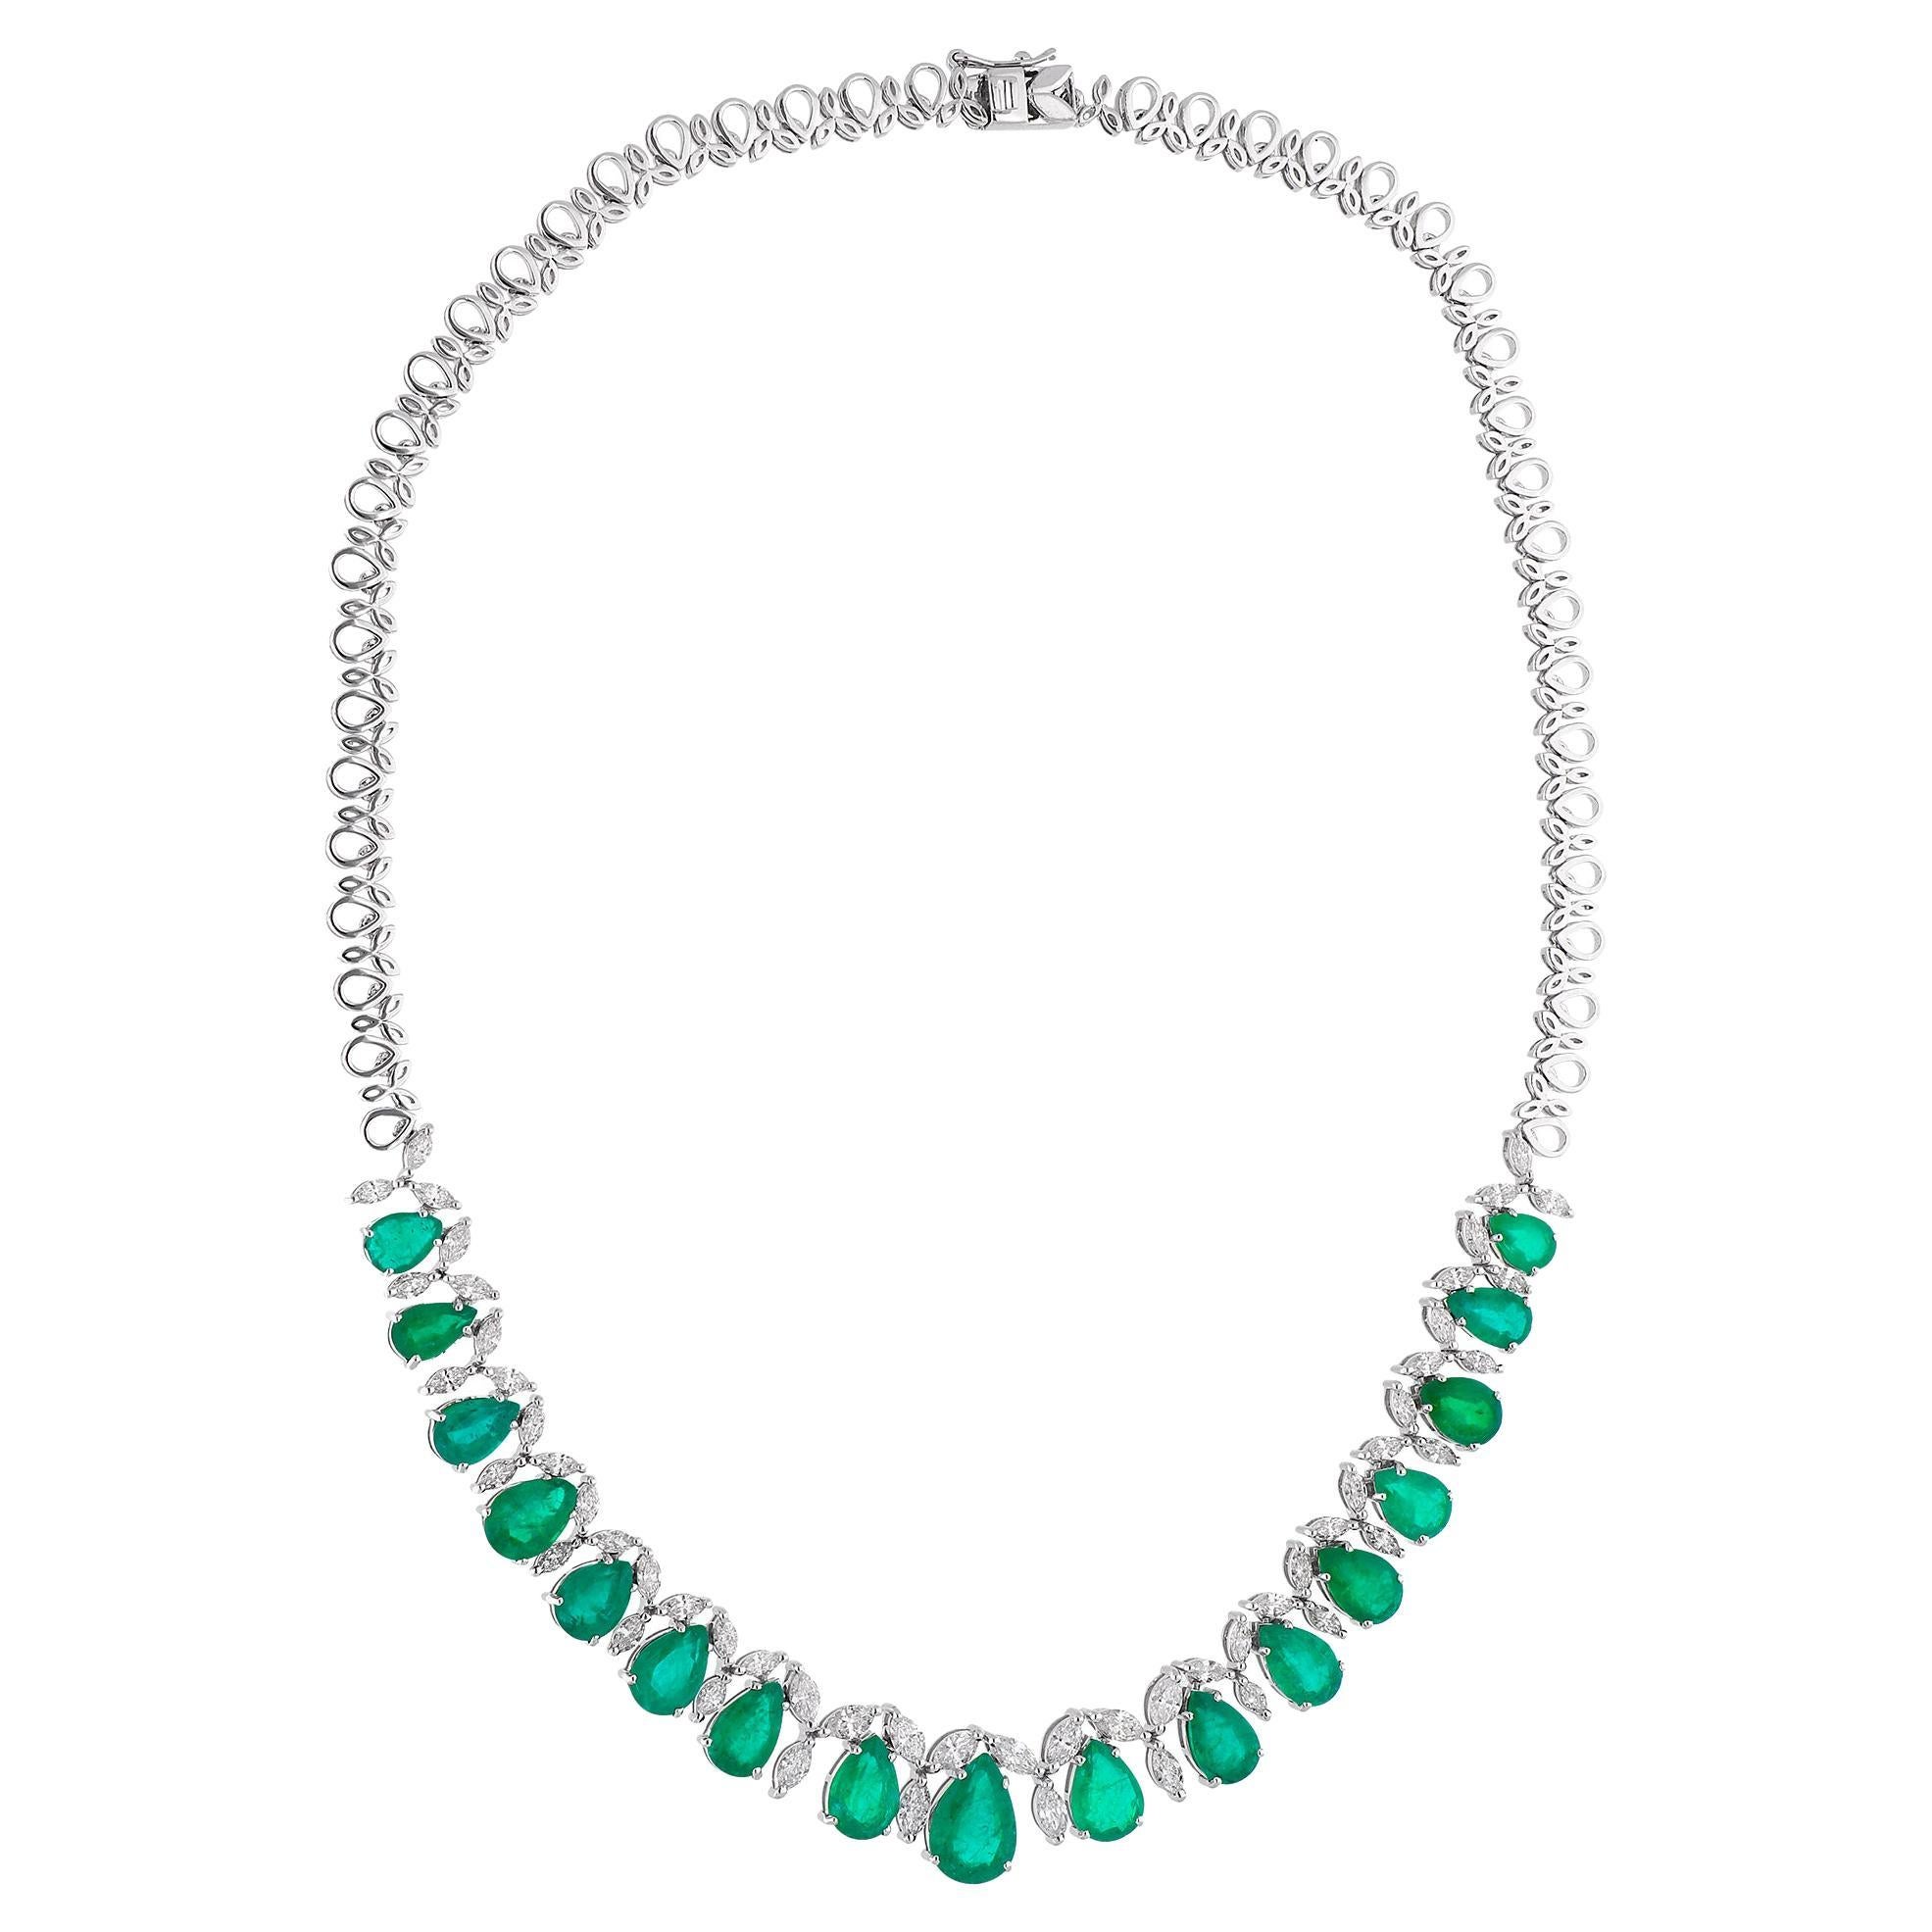 This stunning choker necklace showcases a pear-shaped natural emerald adorned with marquise diamonds, all set in 18 karat white gold. Handcrafted with meticulous attention to detail, this piece of jewelry exudes elegance, luxury, and exceptional